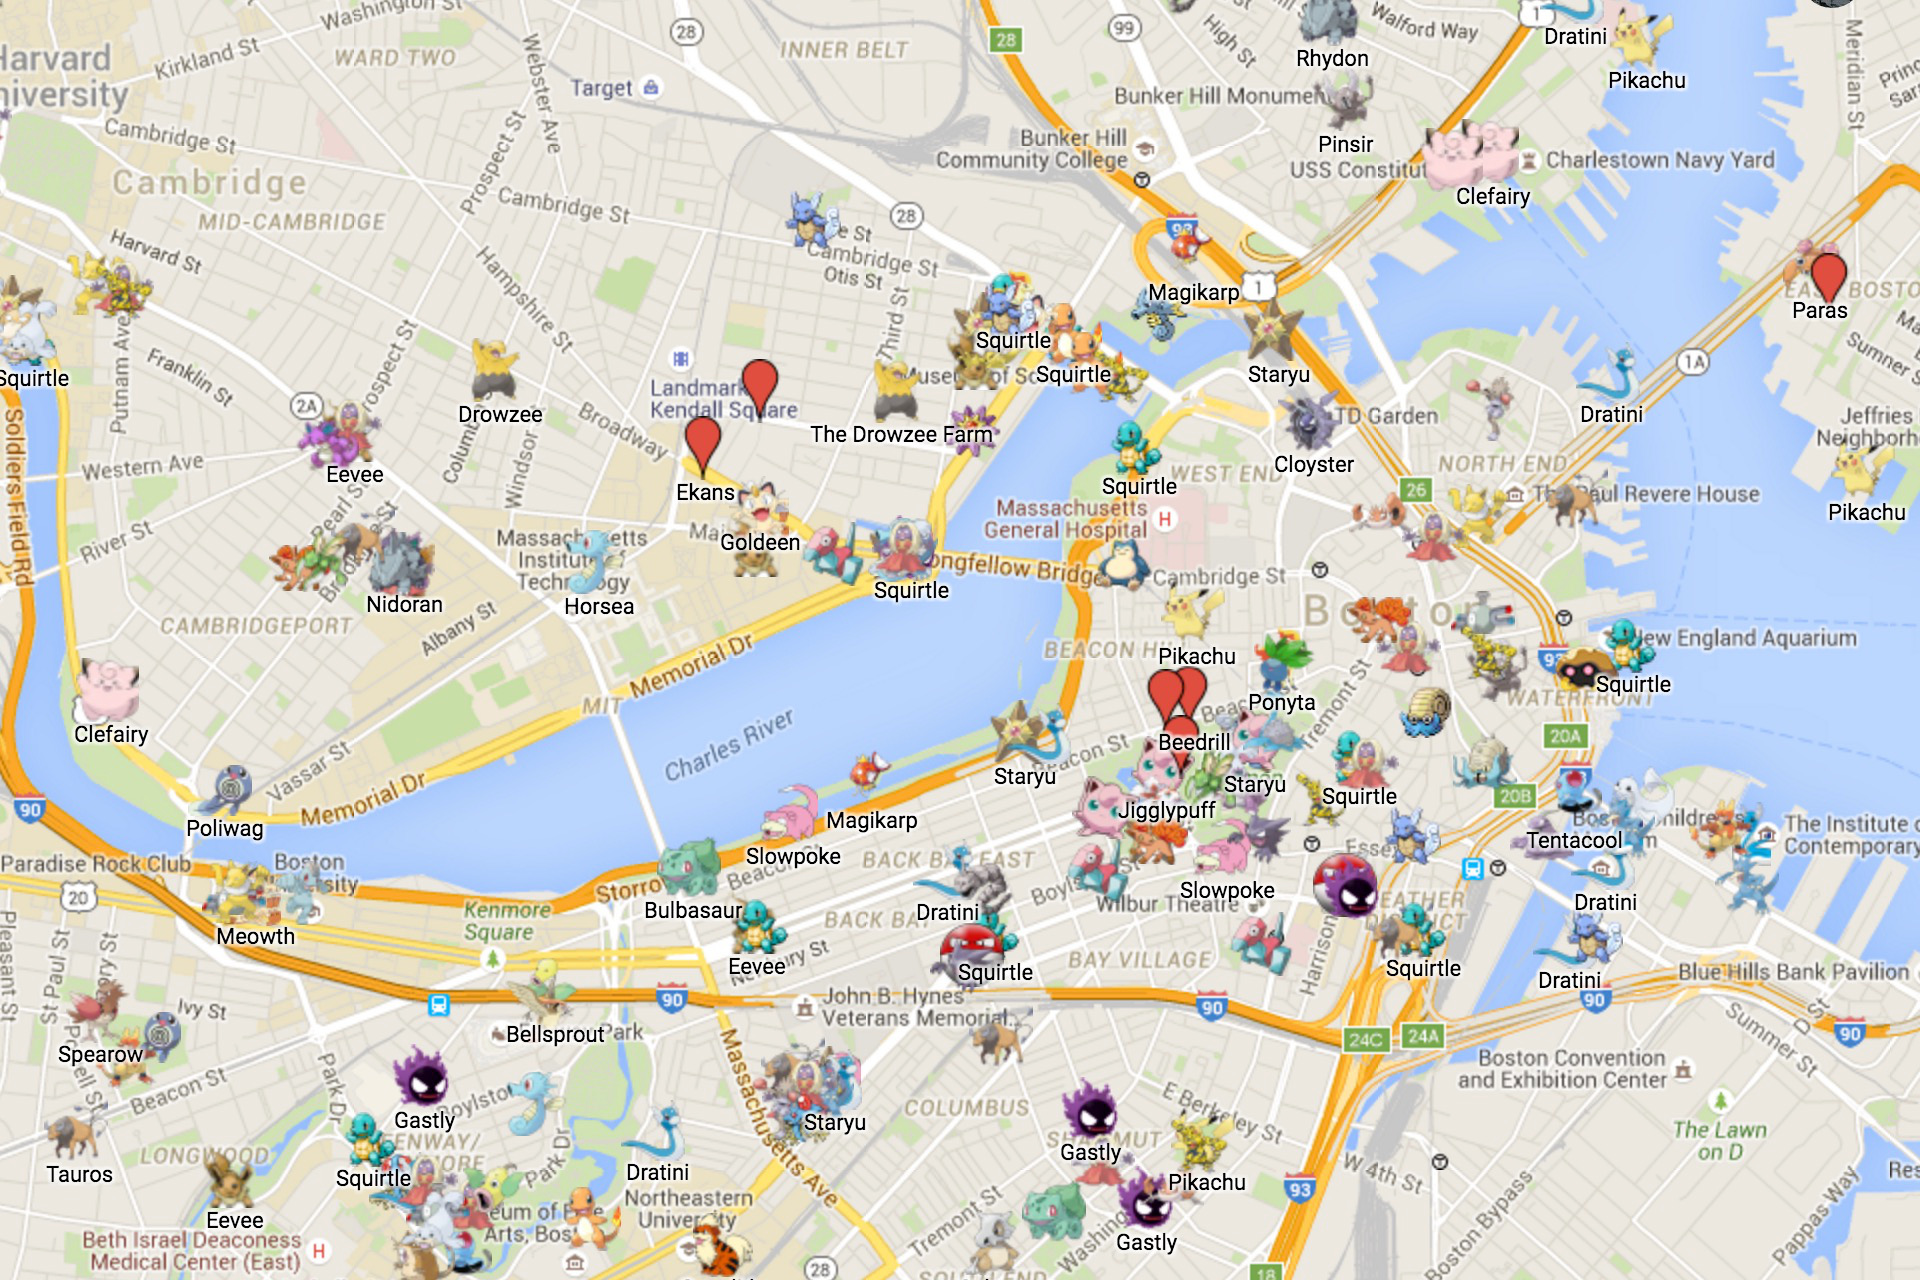 Here's a map showing locations of all catchable Pokémon in Omega